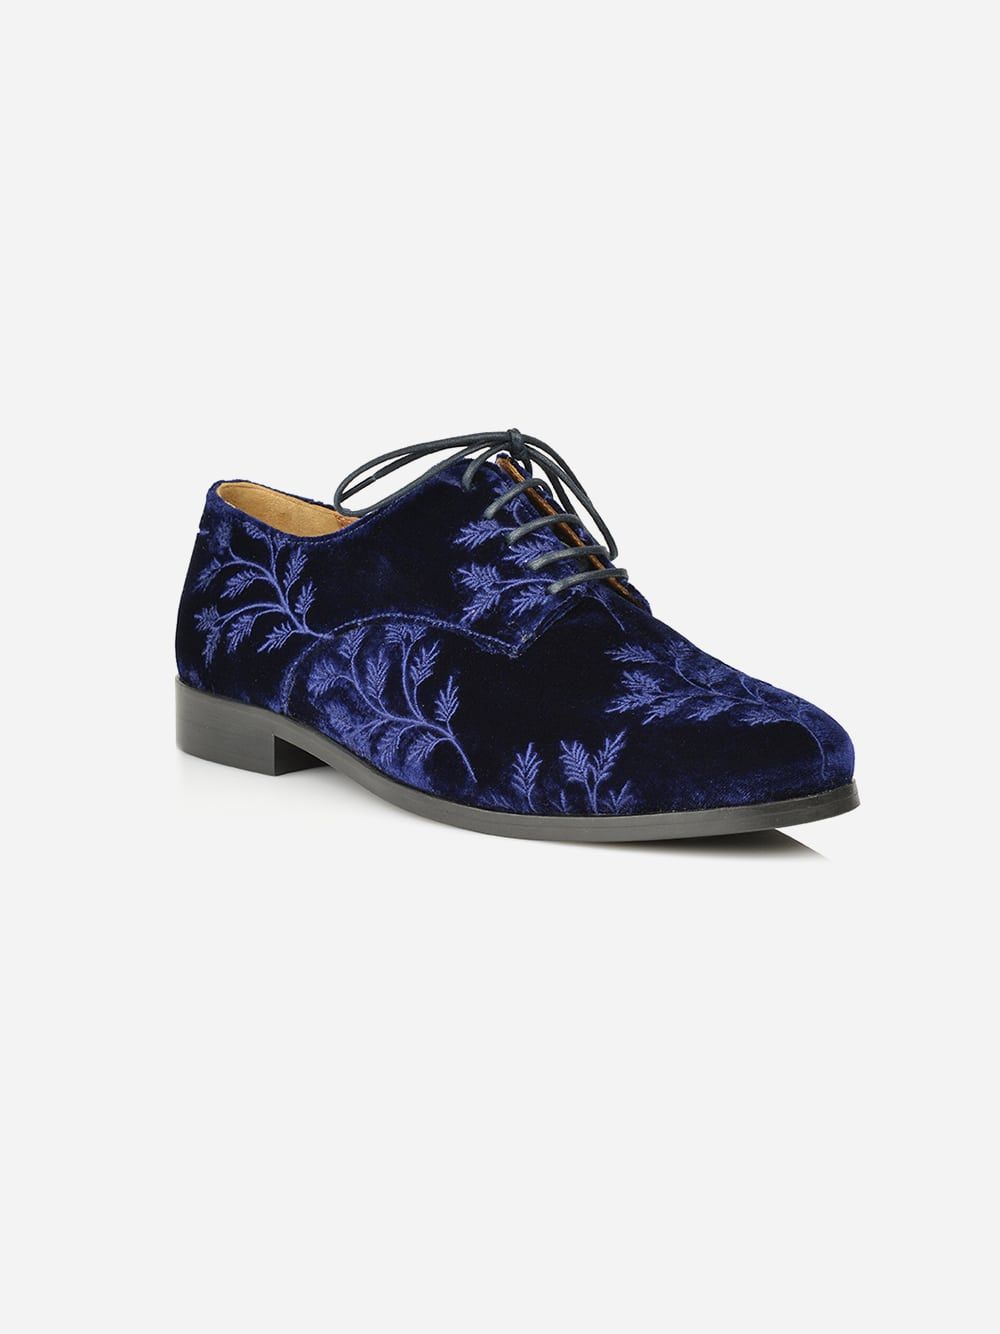 Blue Embroidery Shoes | JJ Heitor